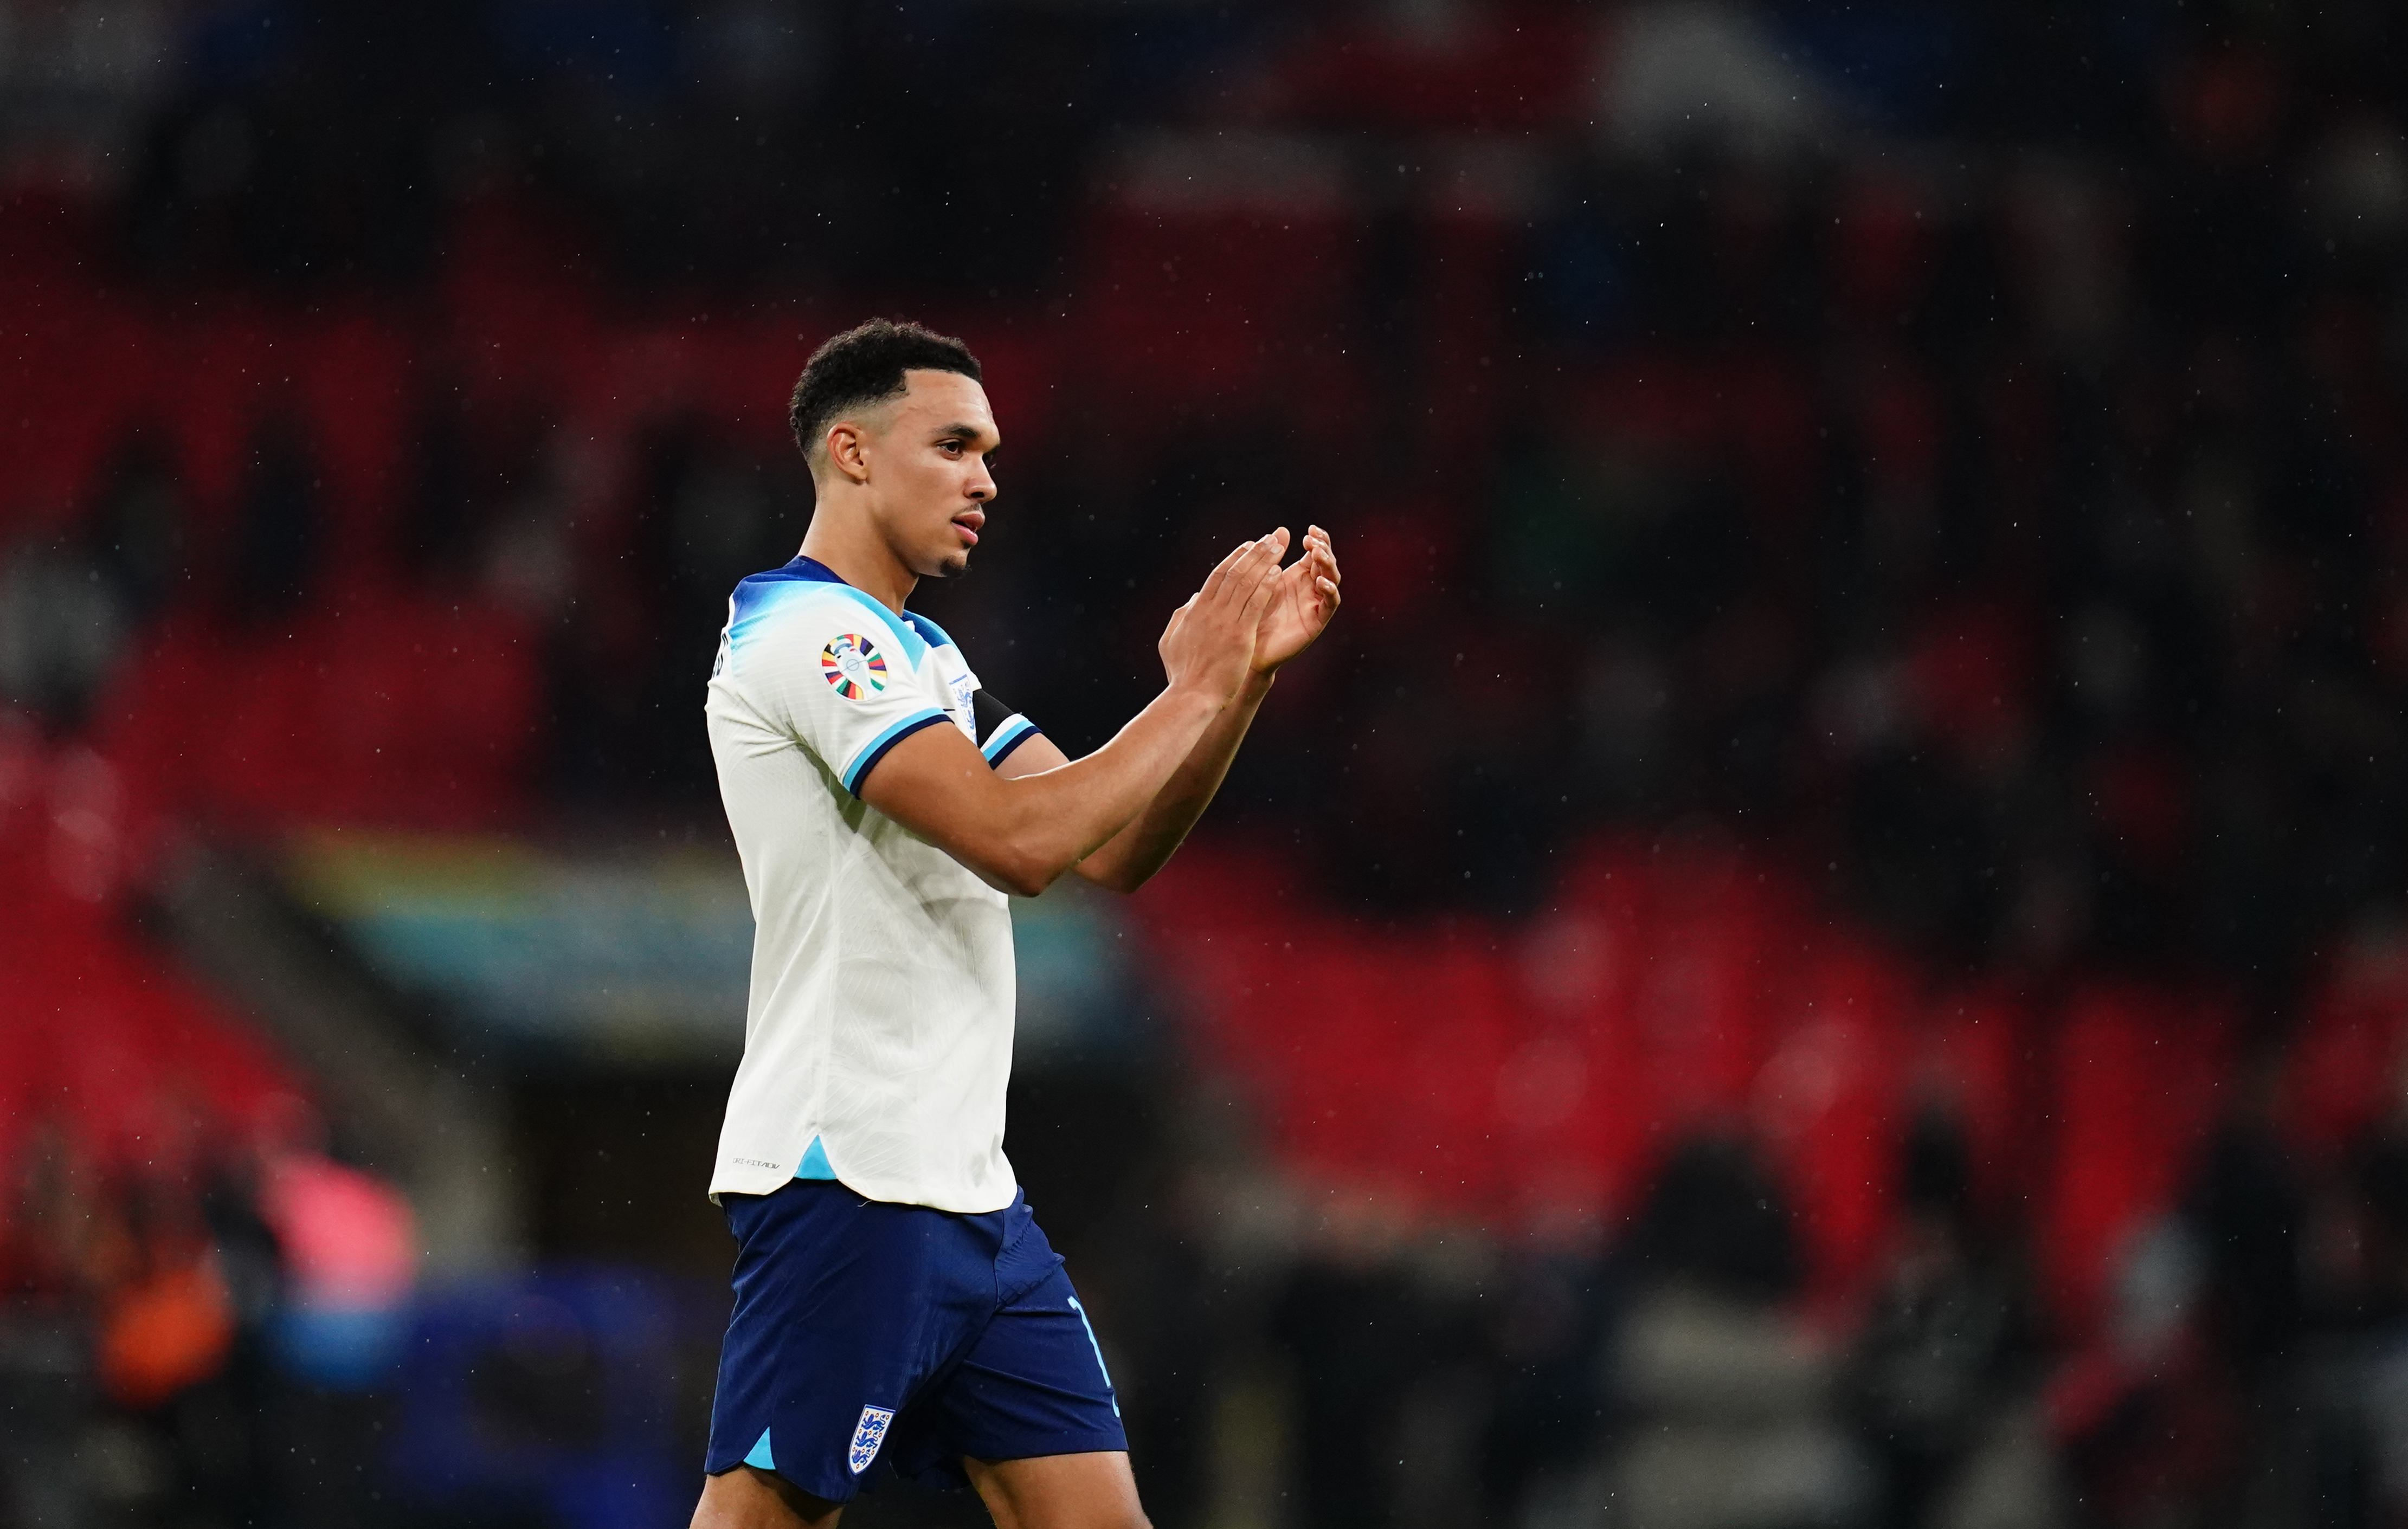 Trent Alexander-Arnold is someone Lewis is hoping to learn from